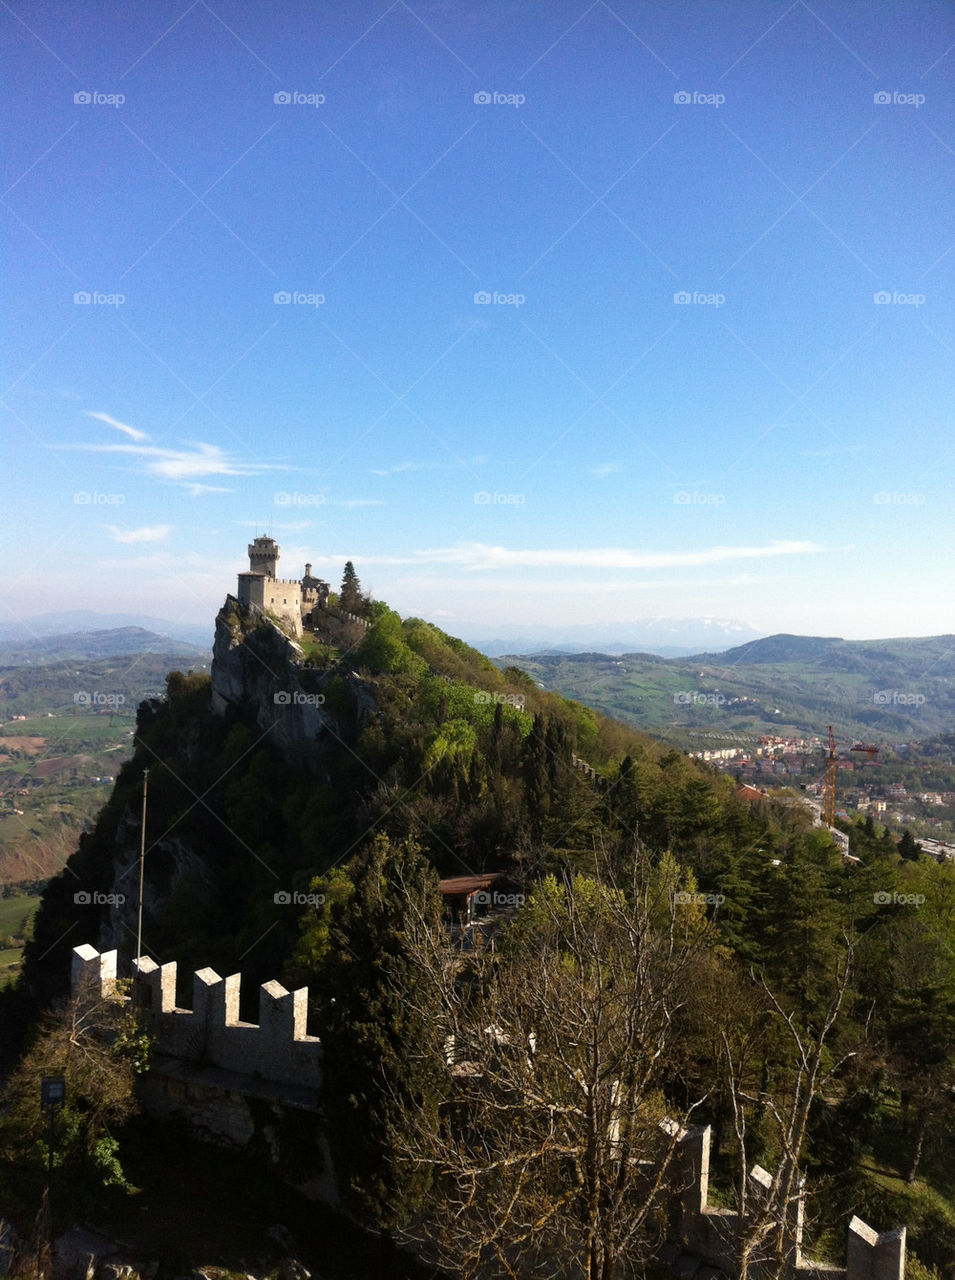 castle san monte marino by andrtot